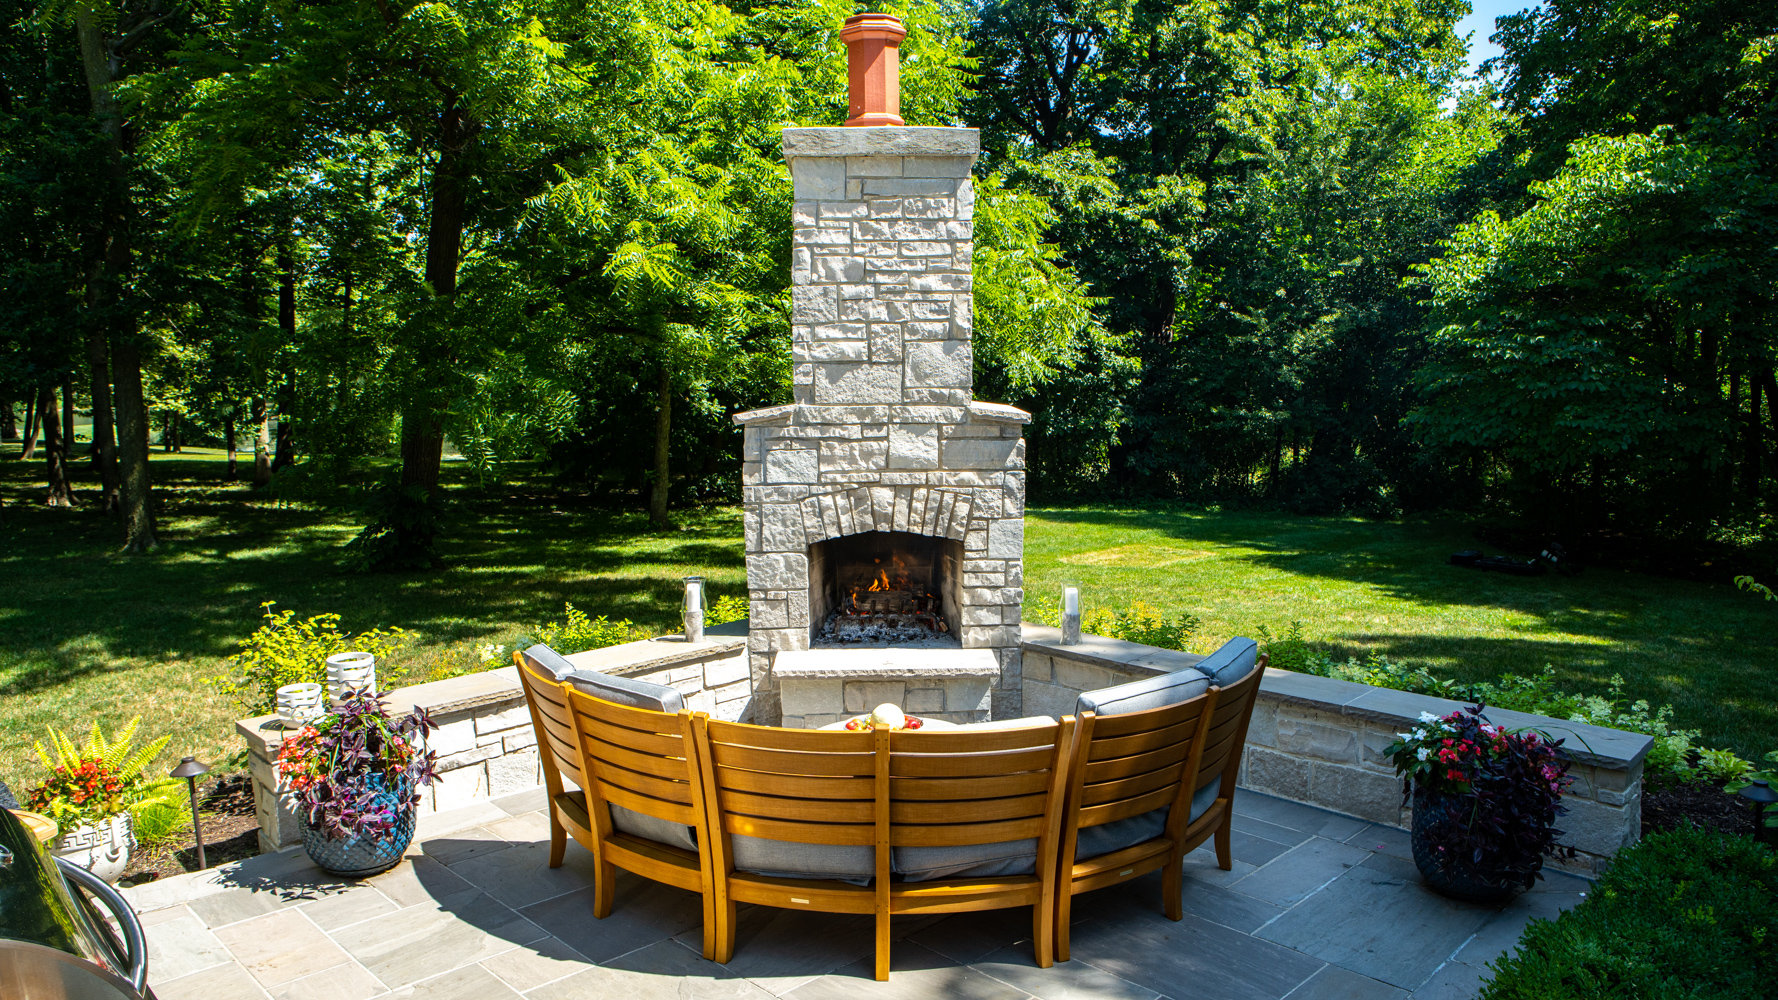 fire place-seating-patio-natural stone-seating wall-containers-lawn